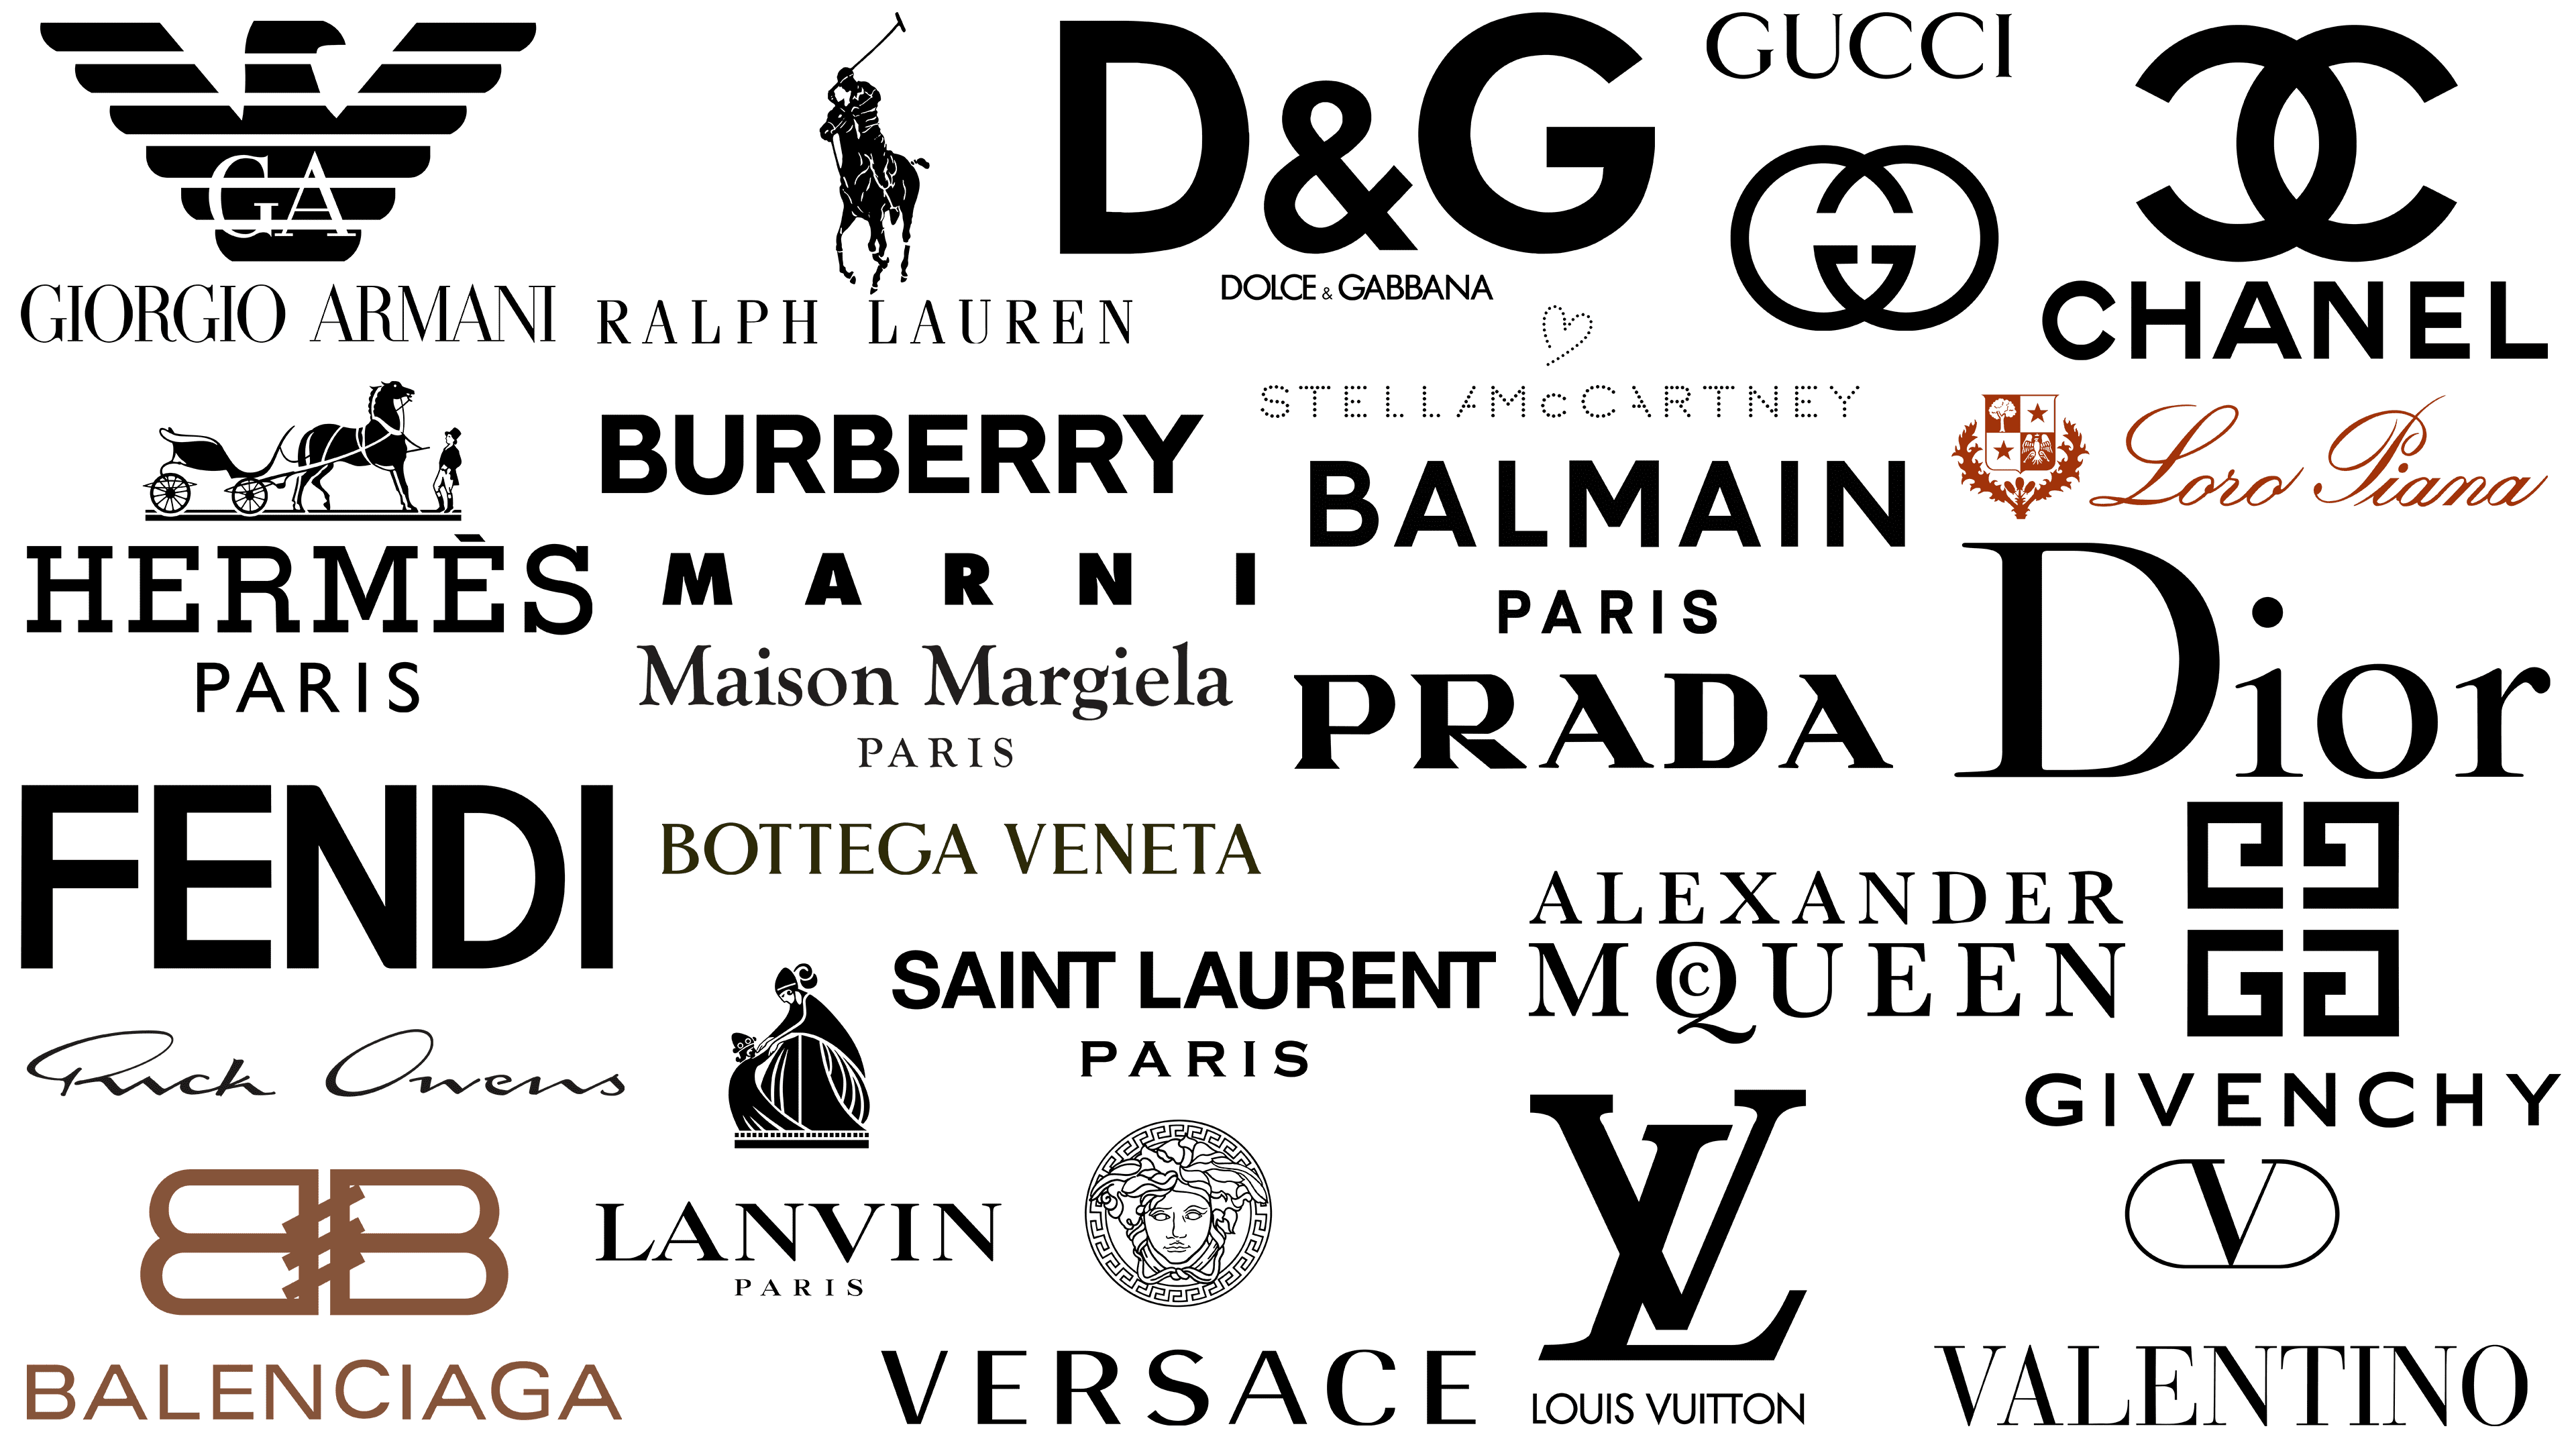 Luxury brands like Gucci, Hermès and Balenciaga are opening stores